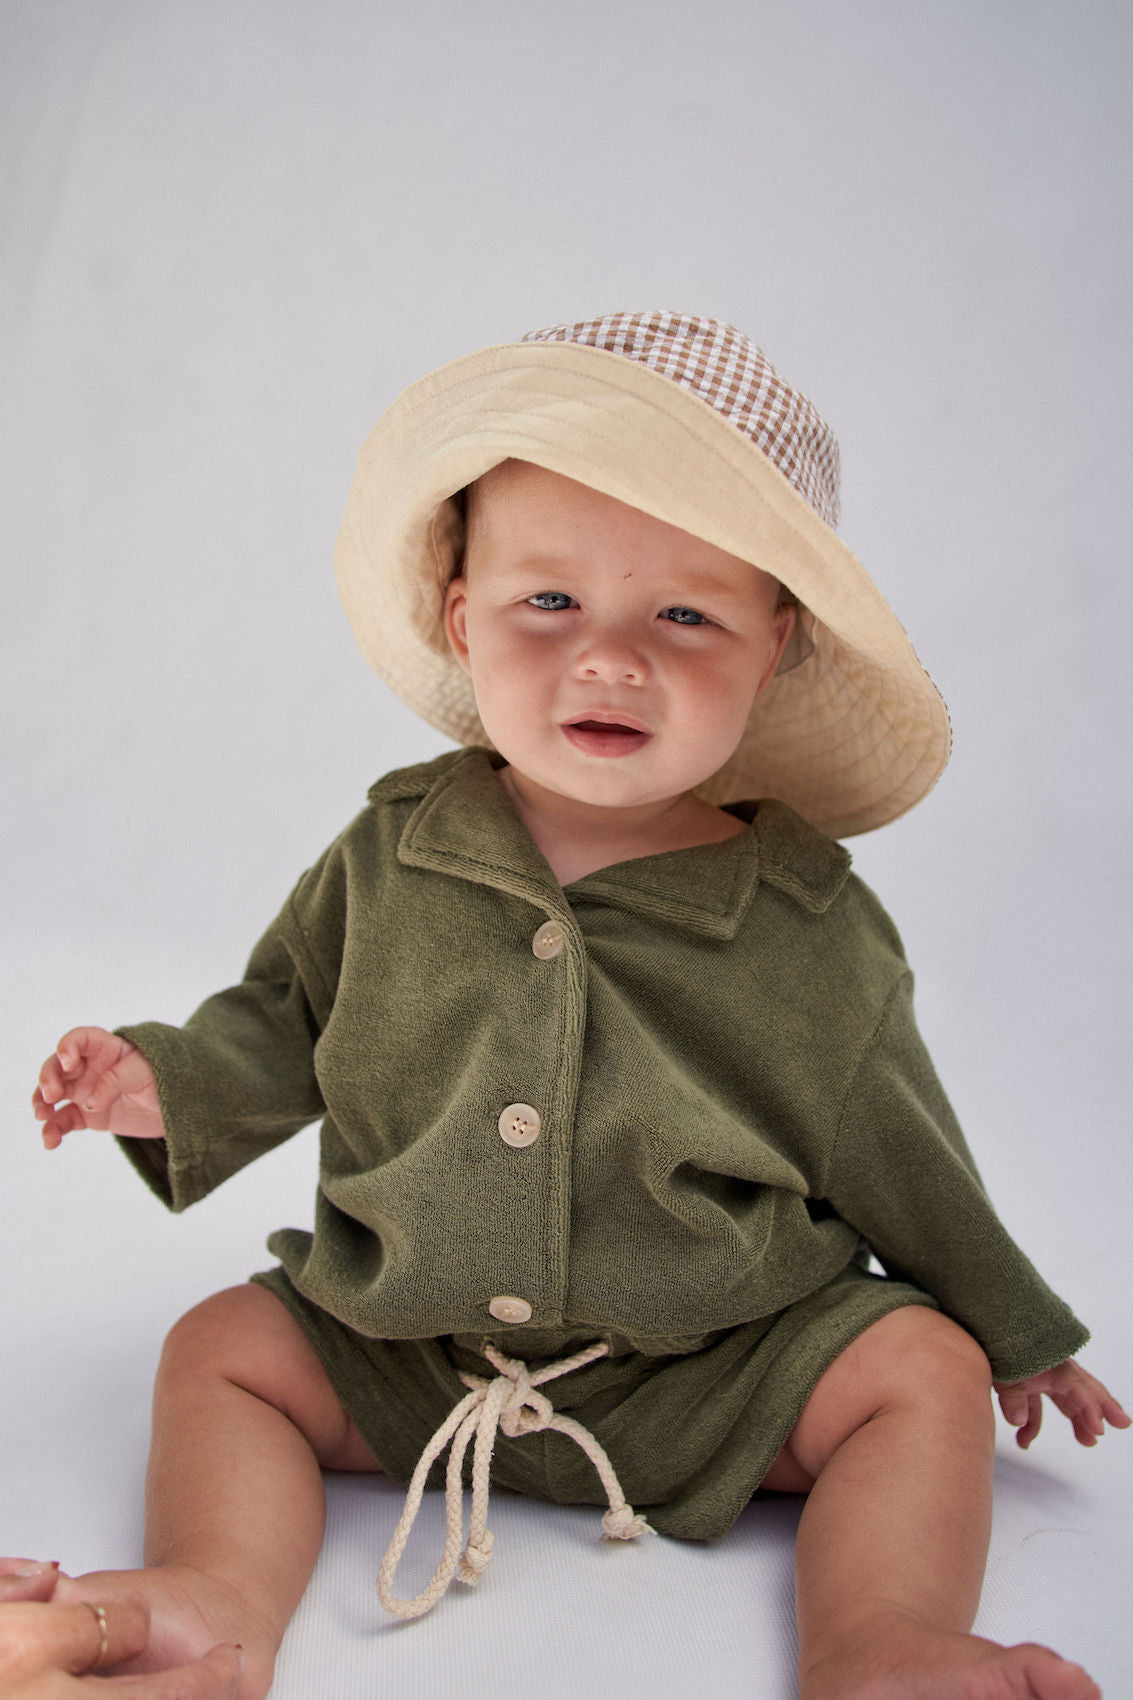 Billie Button Up Set in Khaki Terry, Kids Sets, Children's Clothing, Little the Label